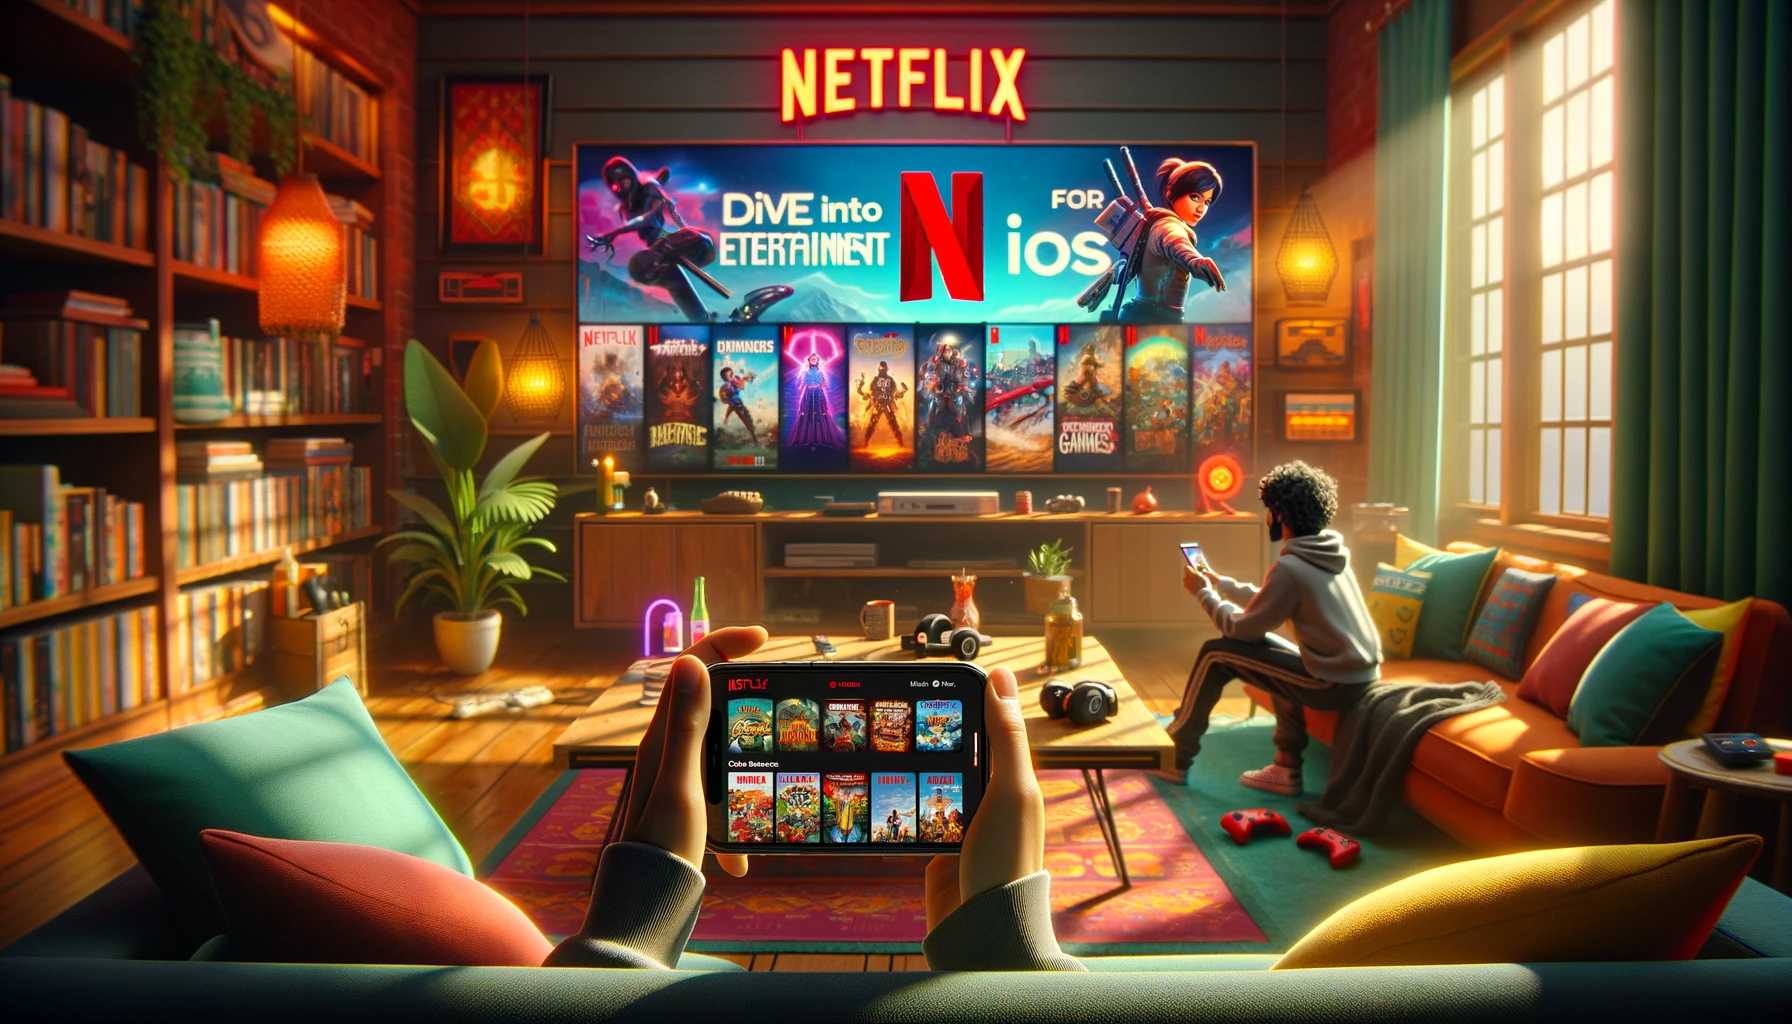 Dive into Entertainment: Netflix Games for iOS